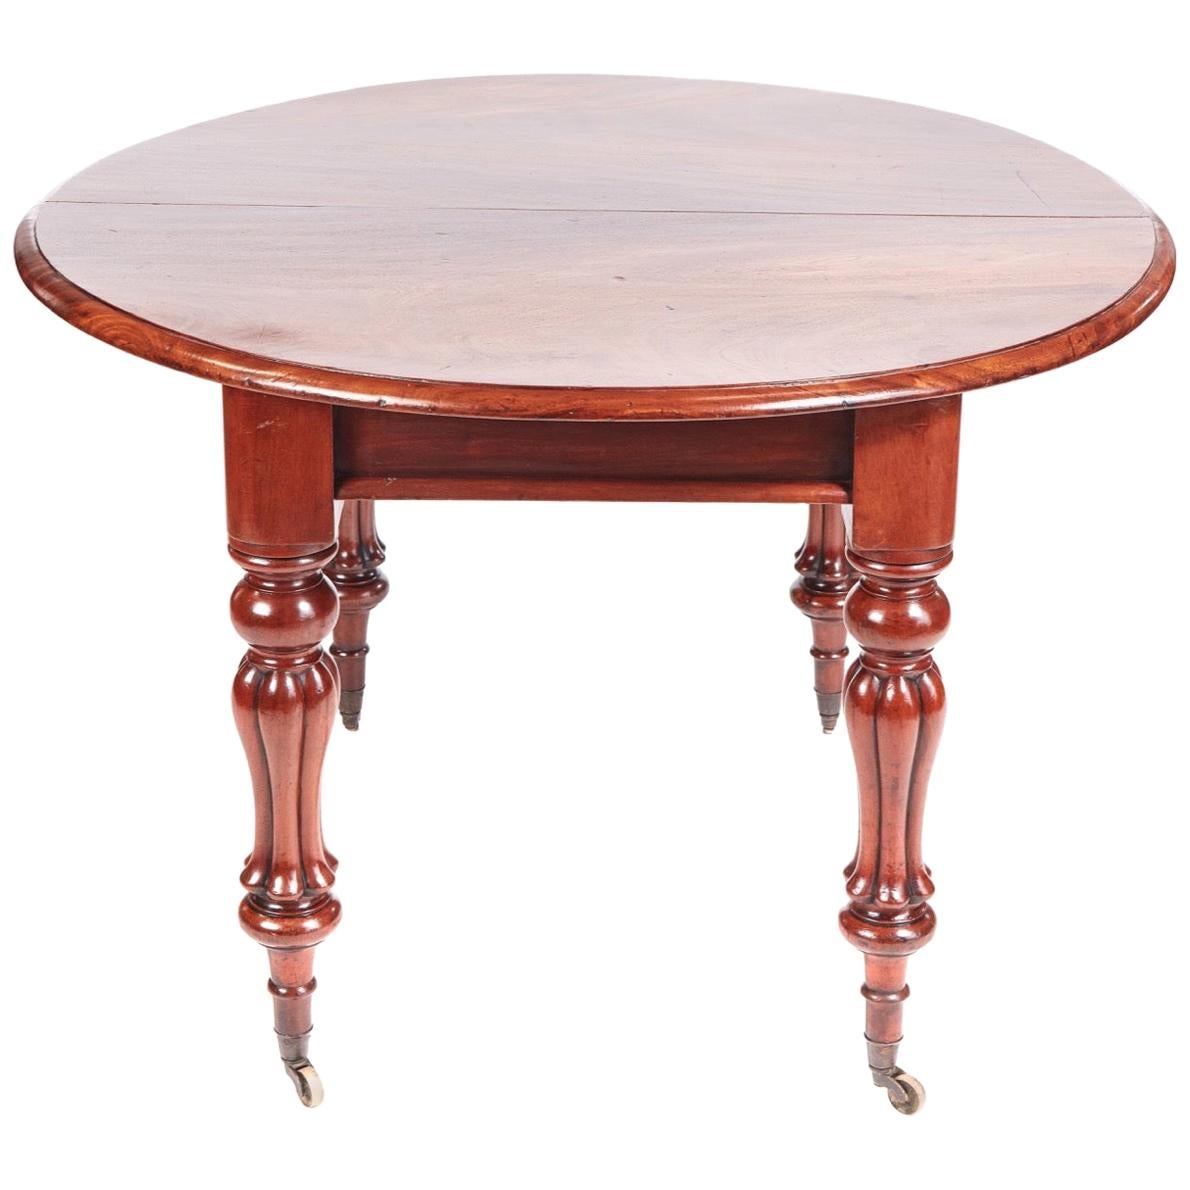 Quality Antique William IV Mahogany Extending Dining Table